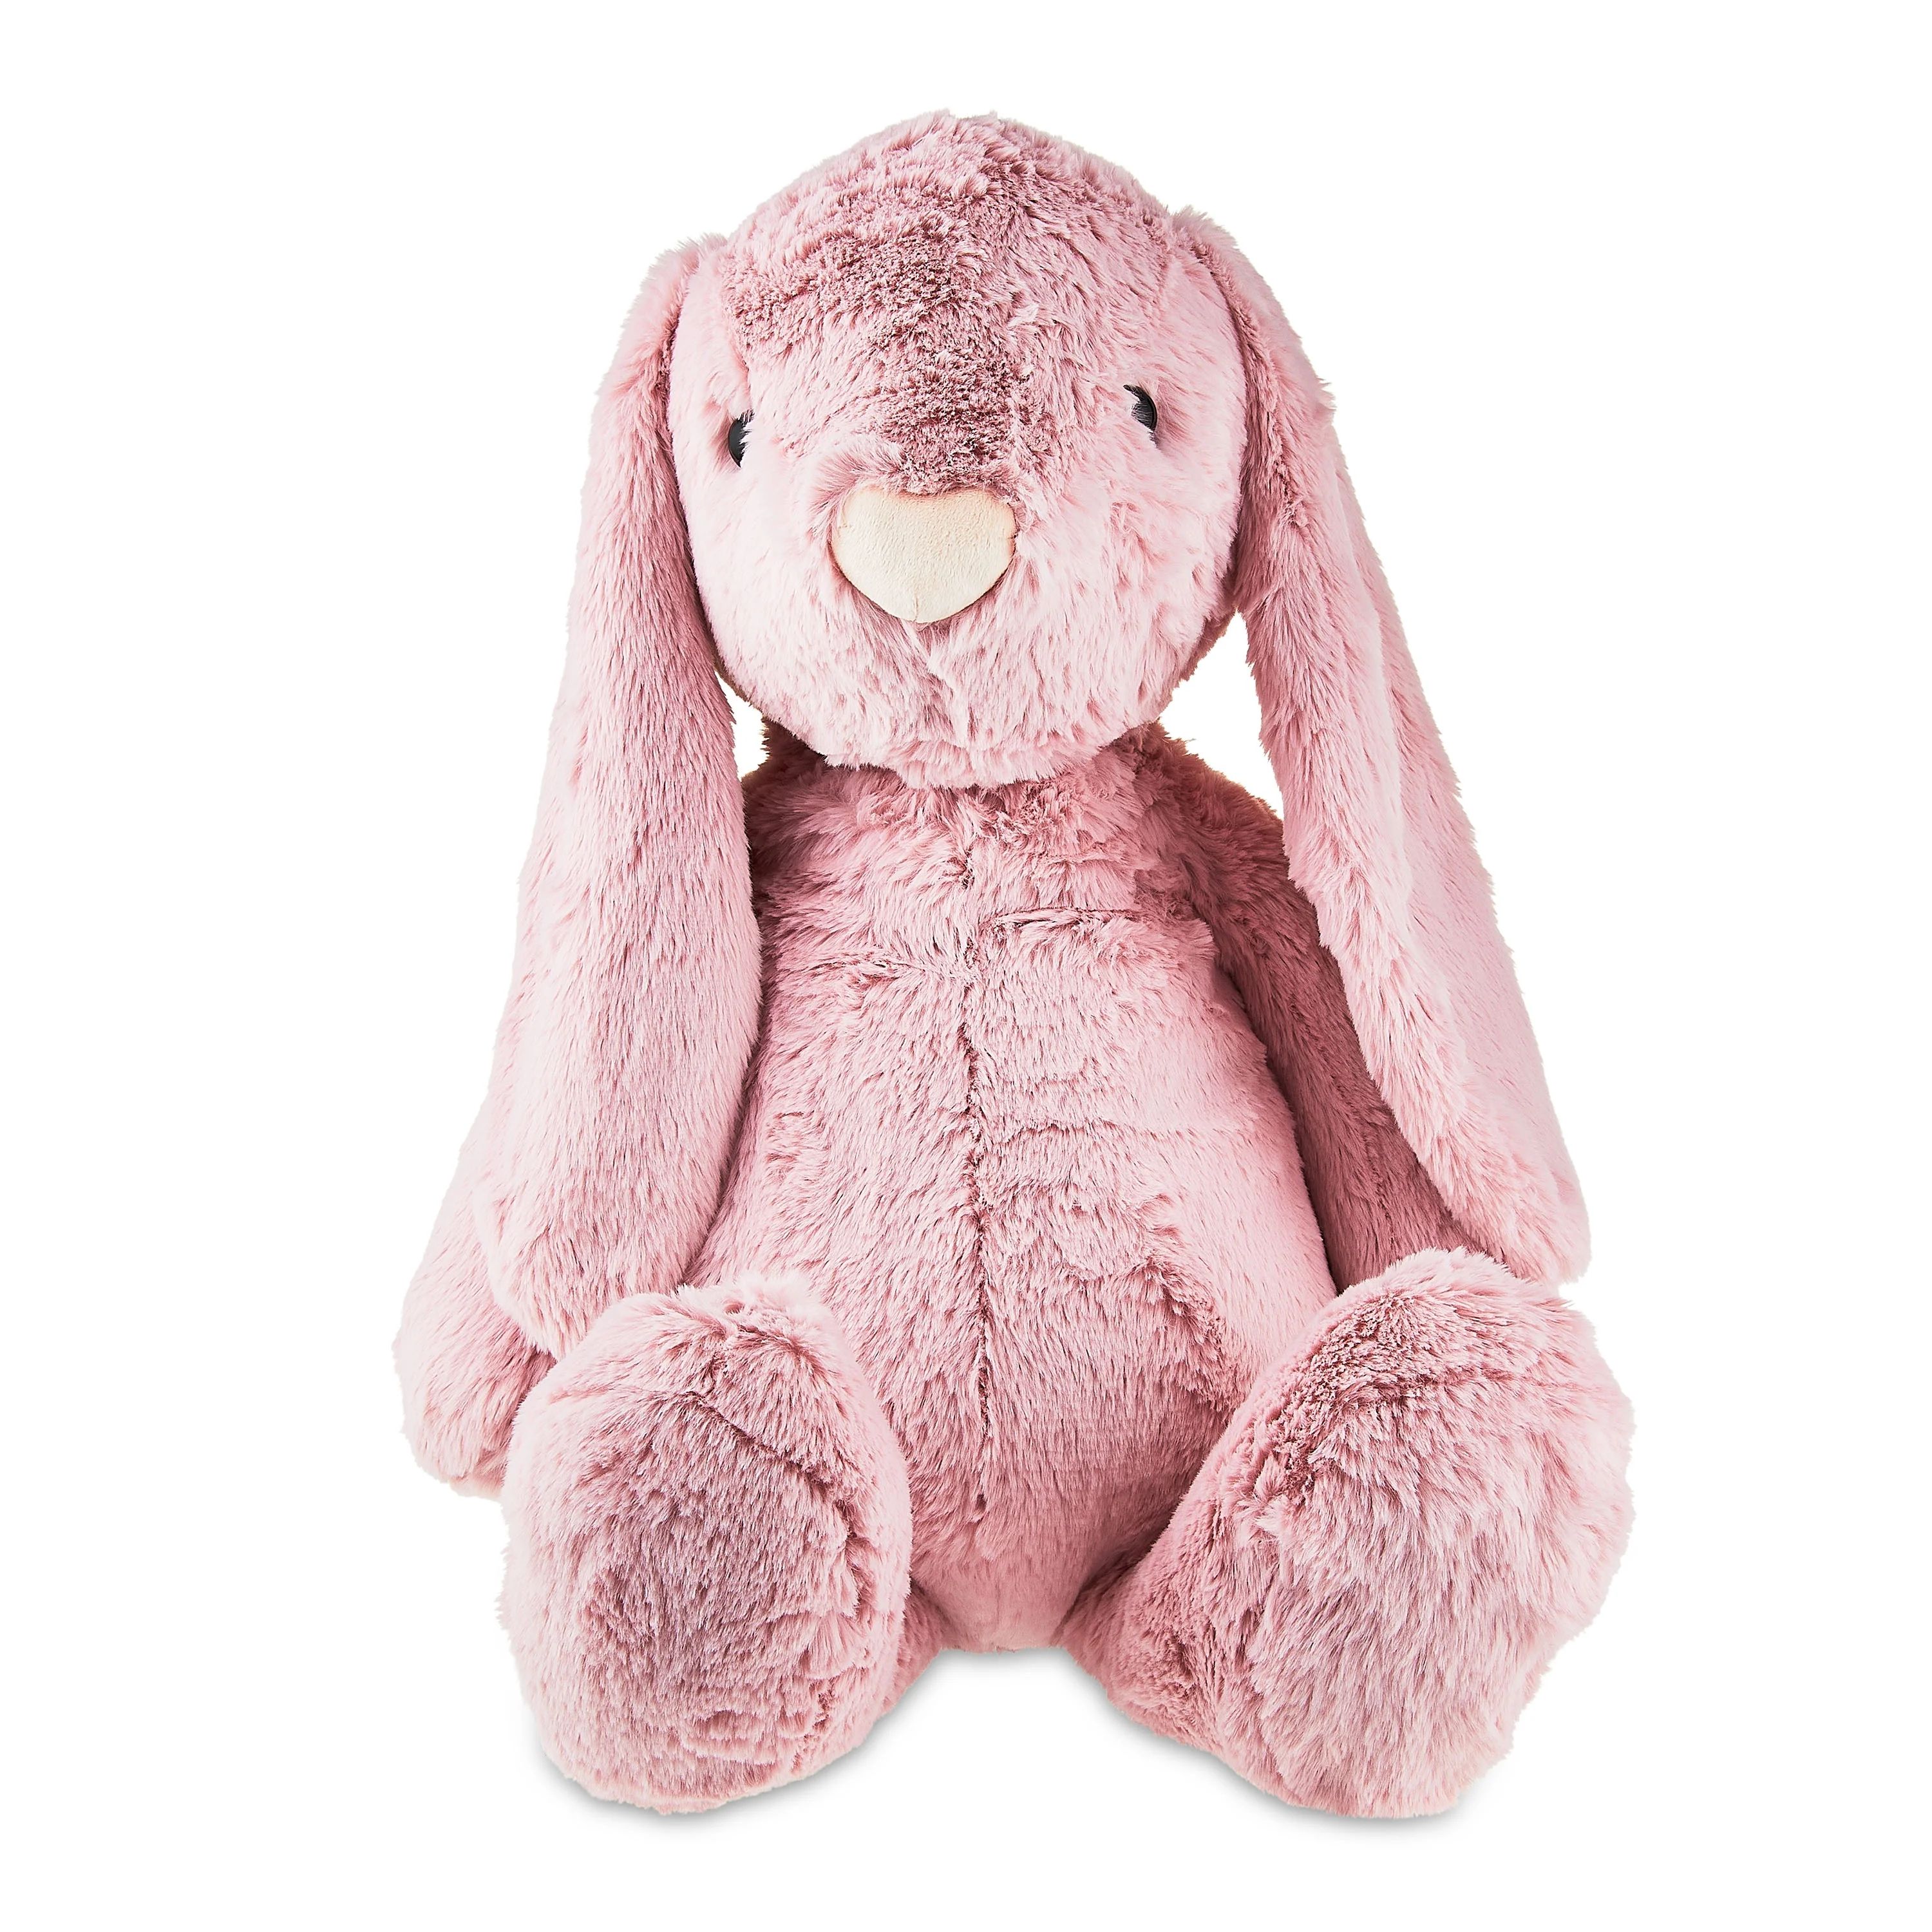 Easter Dusty Pink Bunny Plush, by Way To Celebrate | Walmart (US)